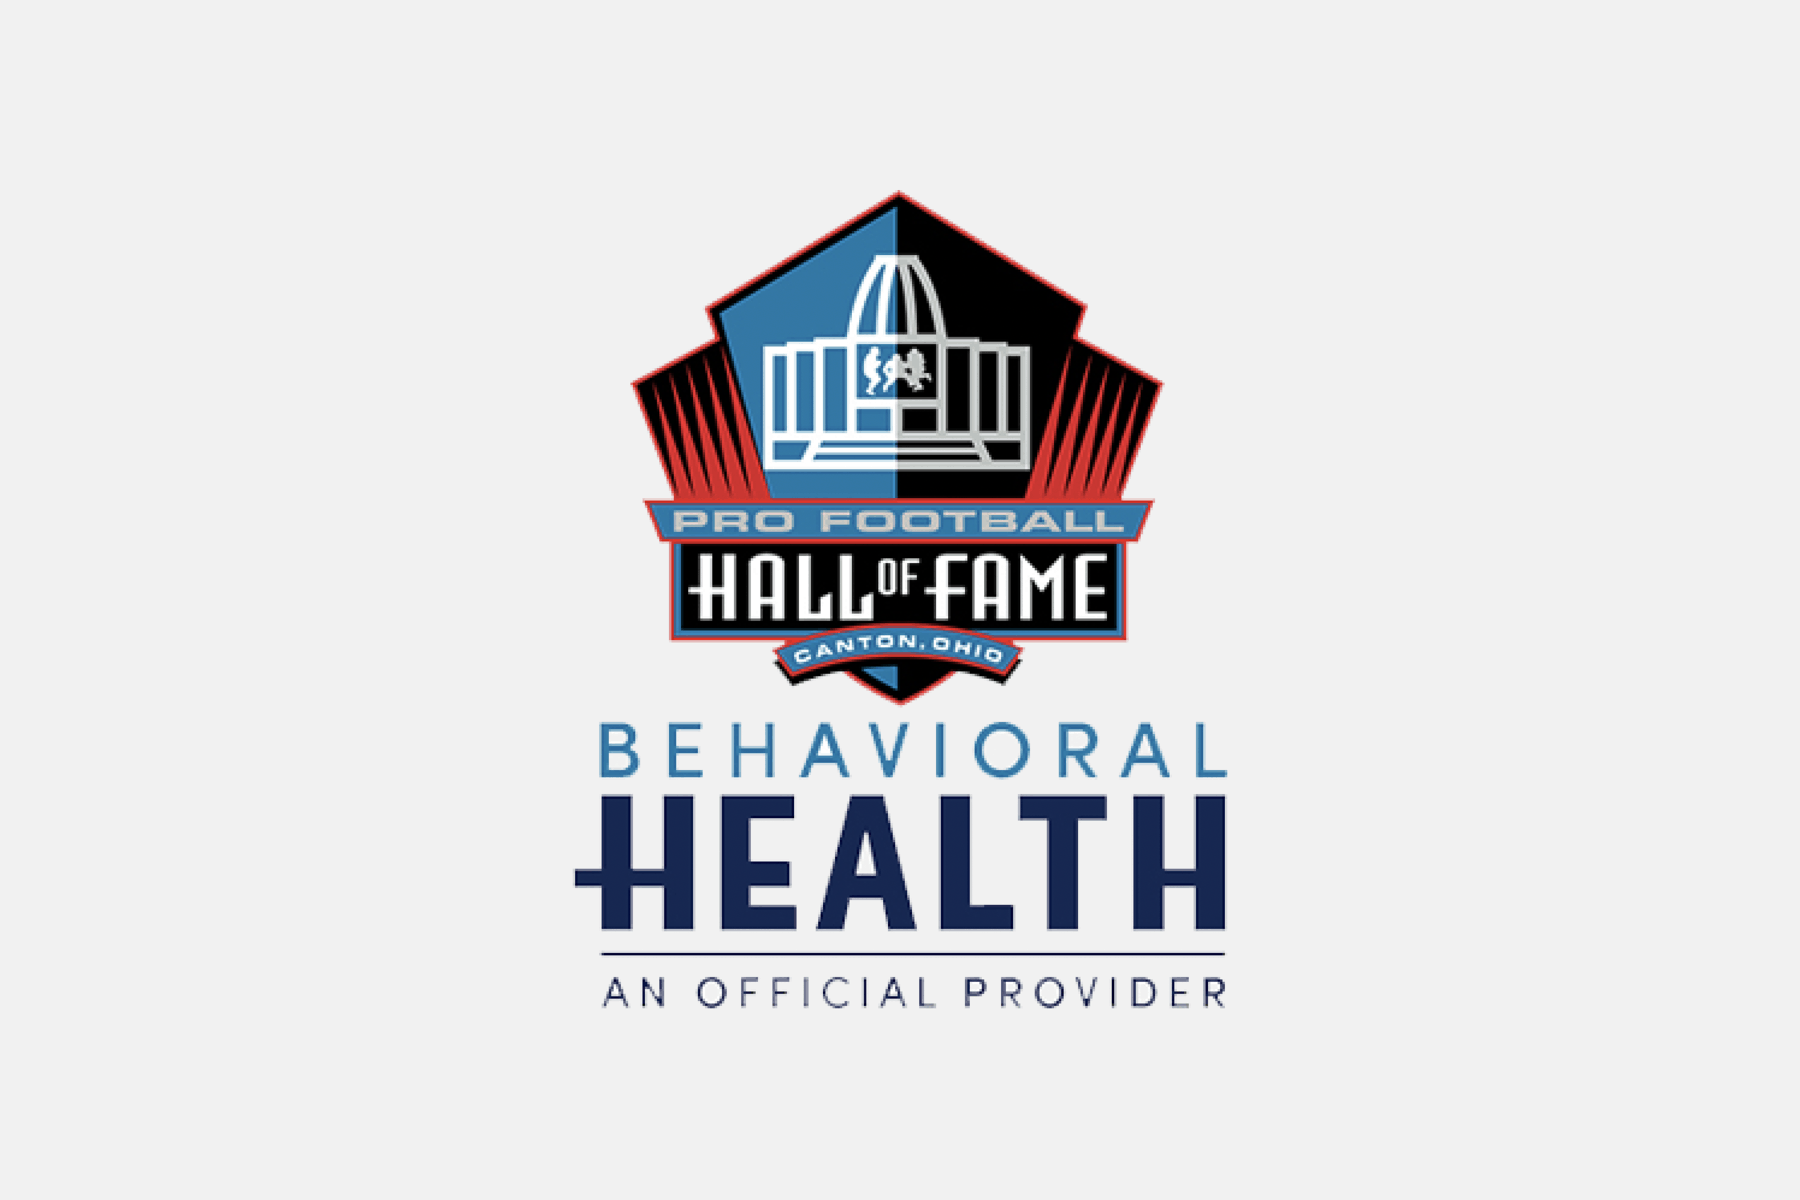 Lighthouse Recovery – Pro Football Hall of Fame “Center of Excellence”